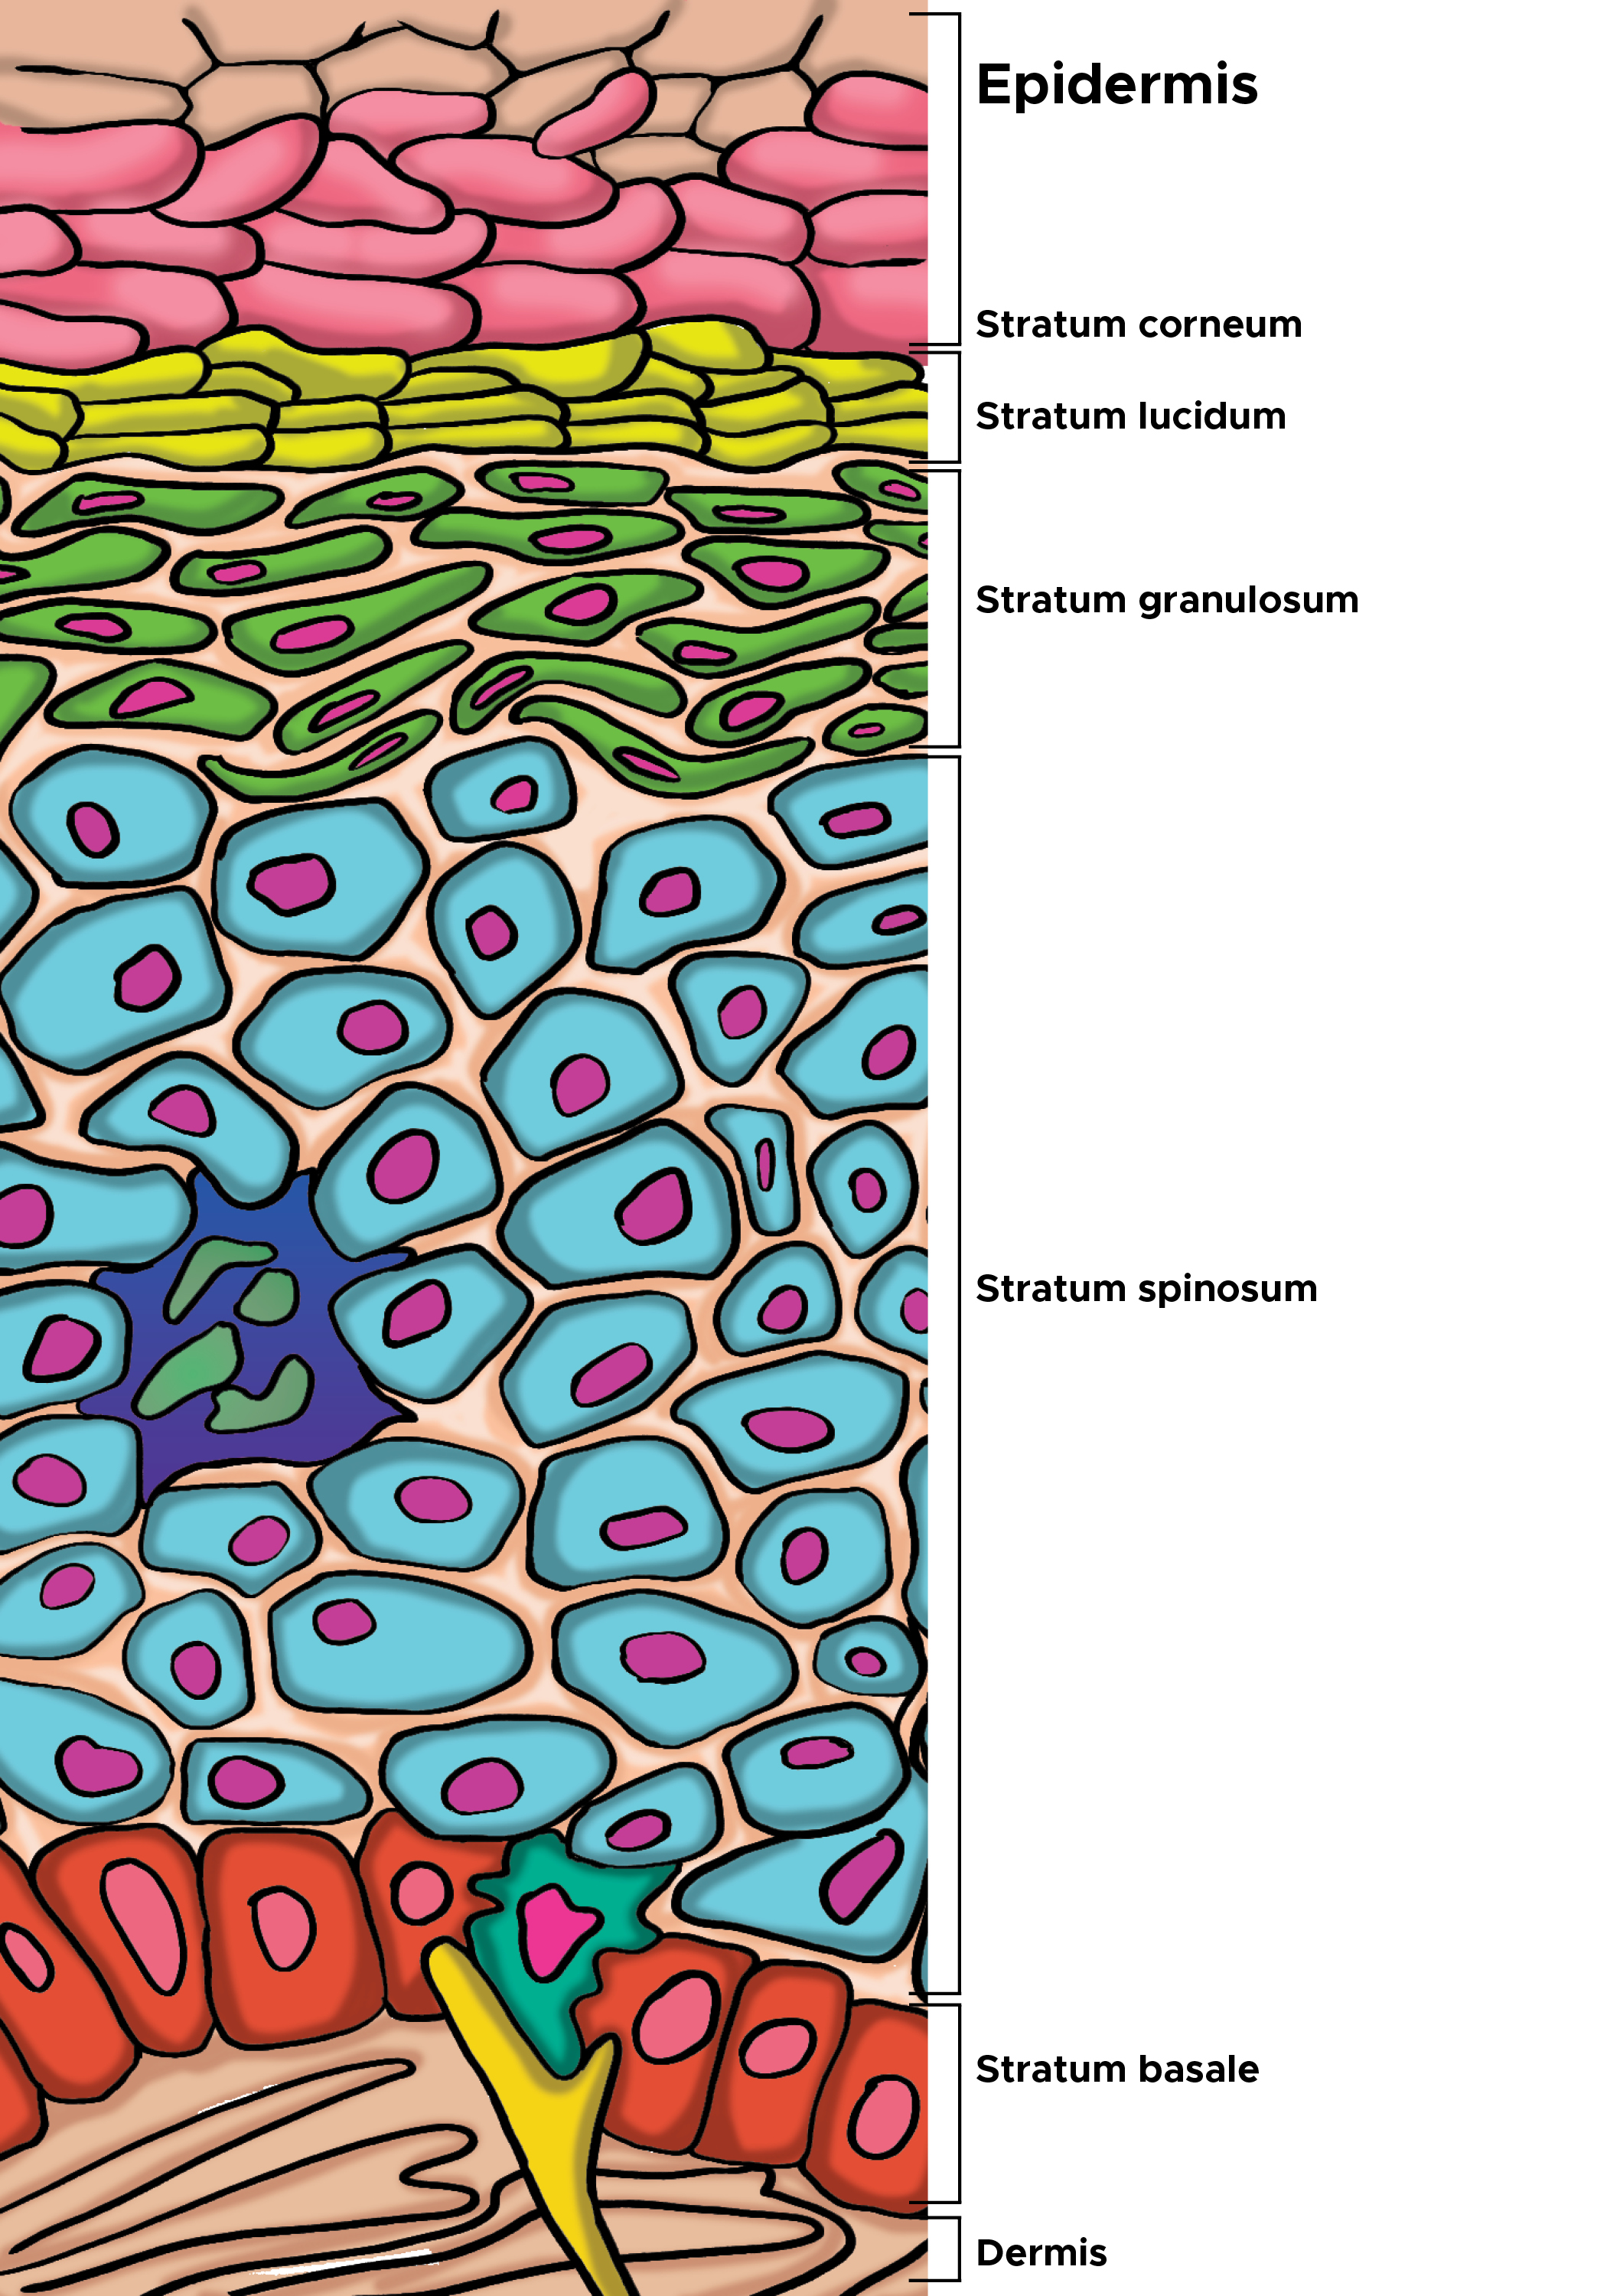 Illustration of cells of the epidermis